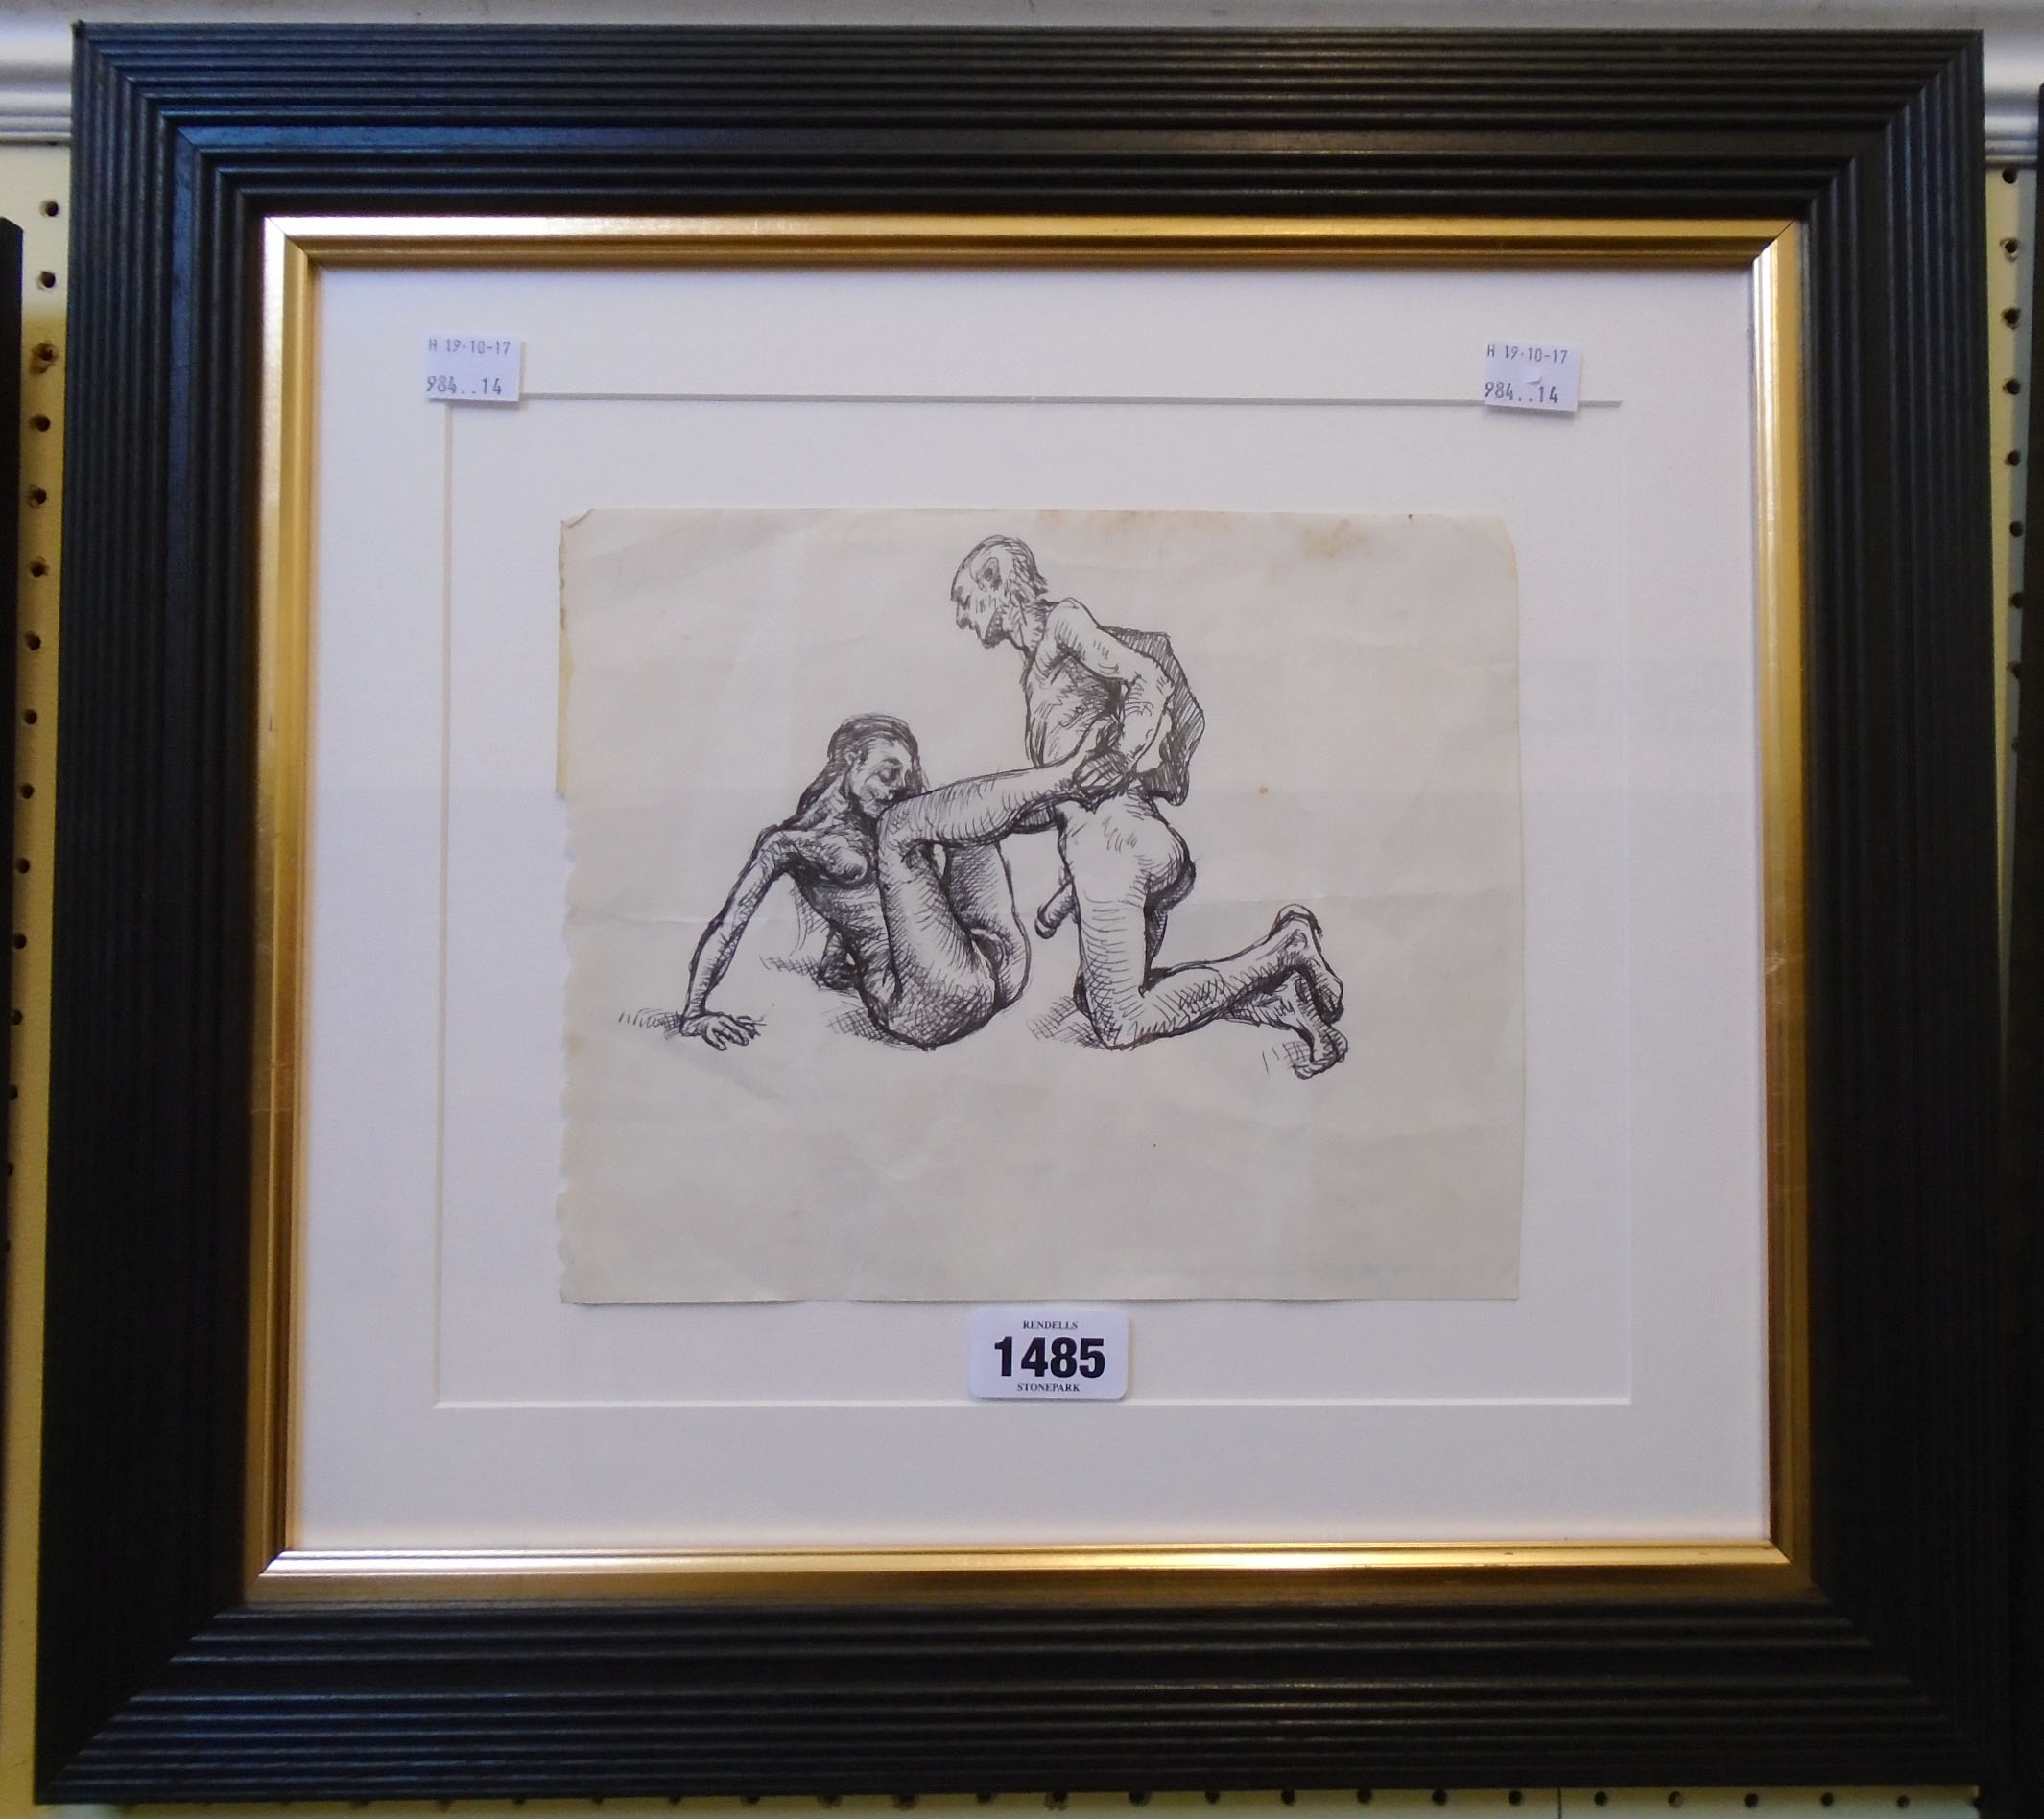 †R. O. Lenkiewicz (attributed): a typical ebonised reeded framed ink sketch, nude couple - 7 1/2"